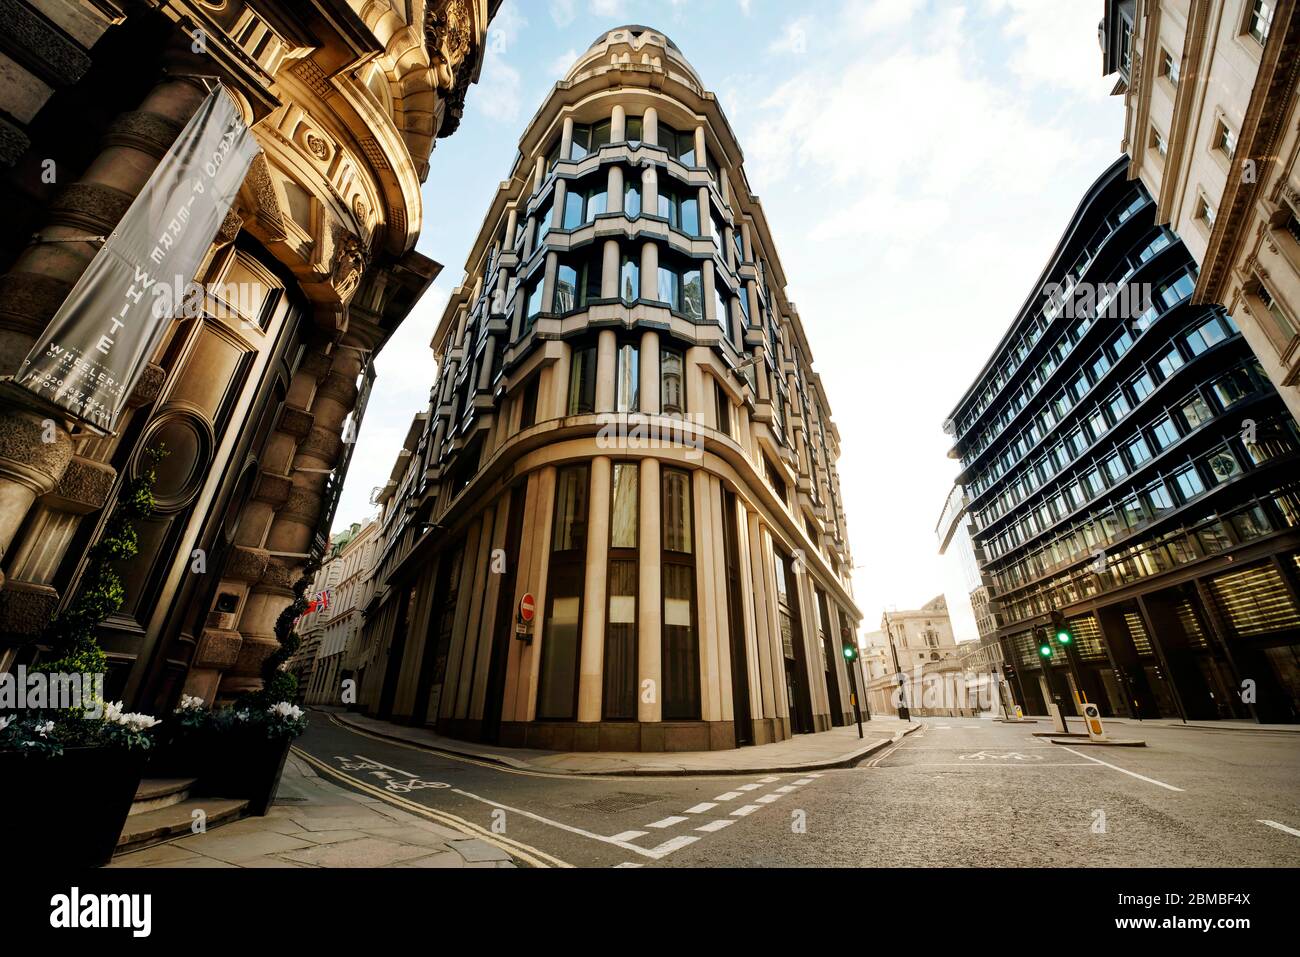 Wide angle architectural shot of the empty City of London; 1 Threadneedle Street building in the centre. Day 7 of the lockdown, London, UK. Mar 2020 Stock Photo